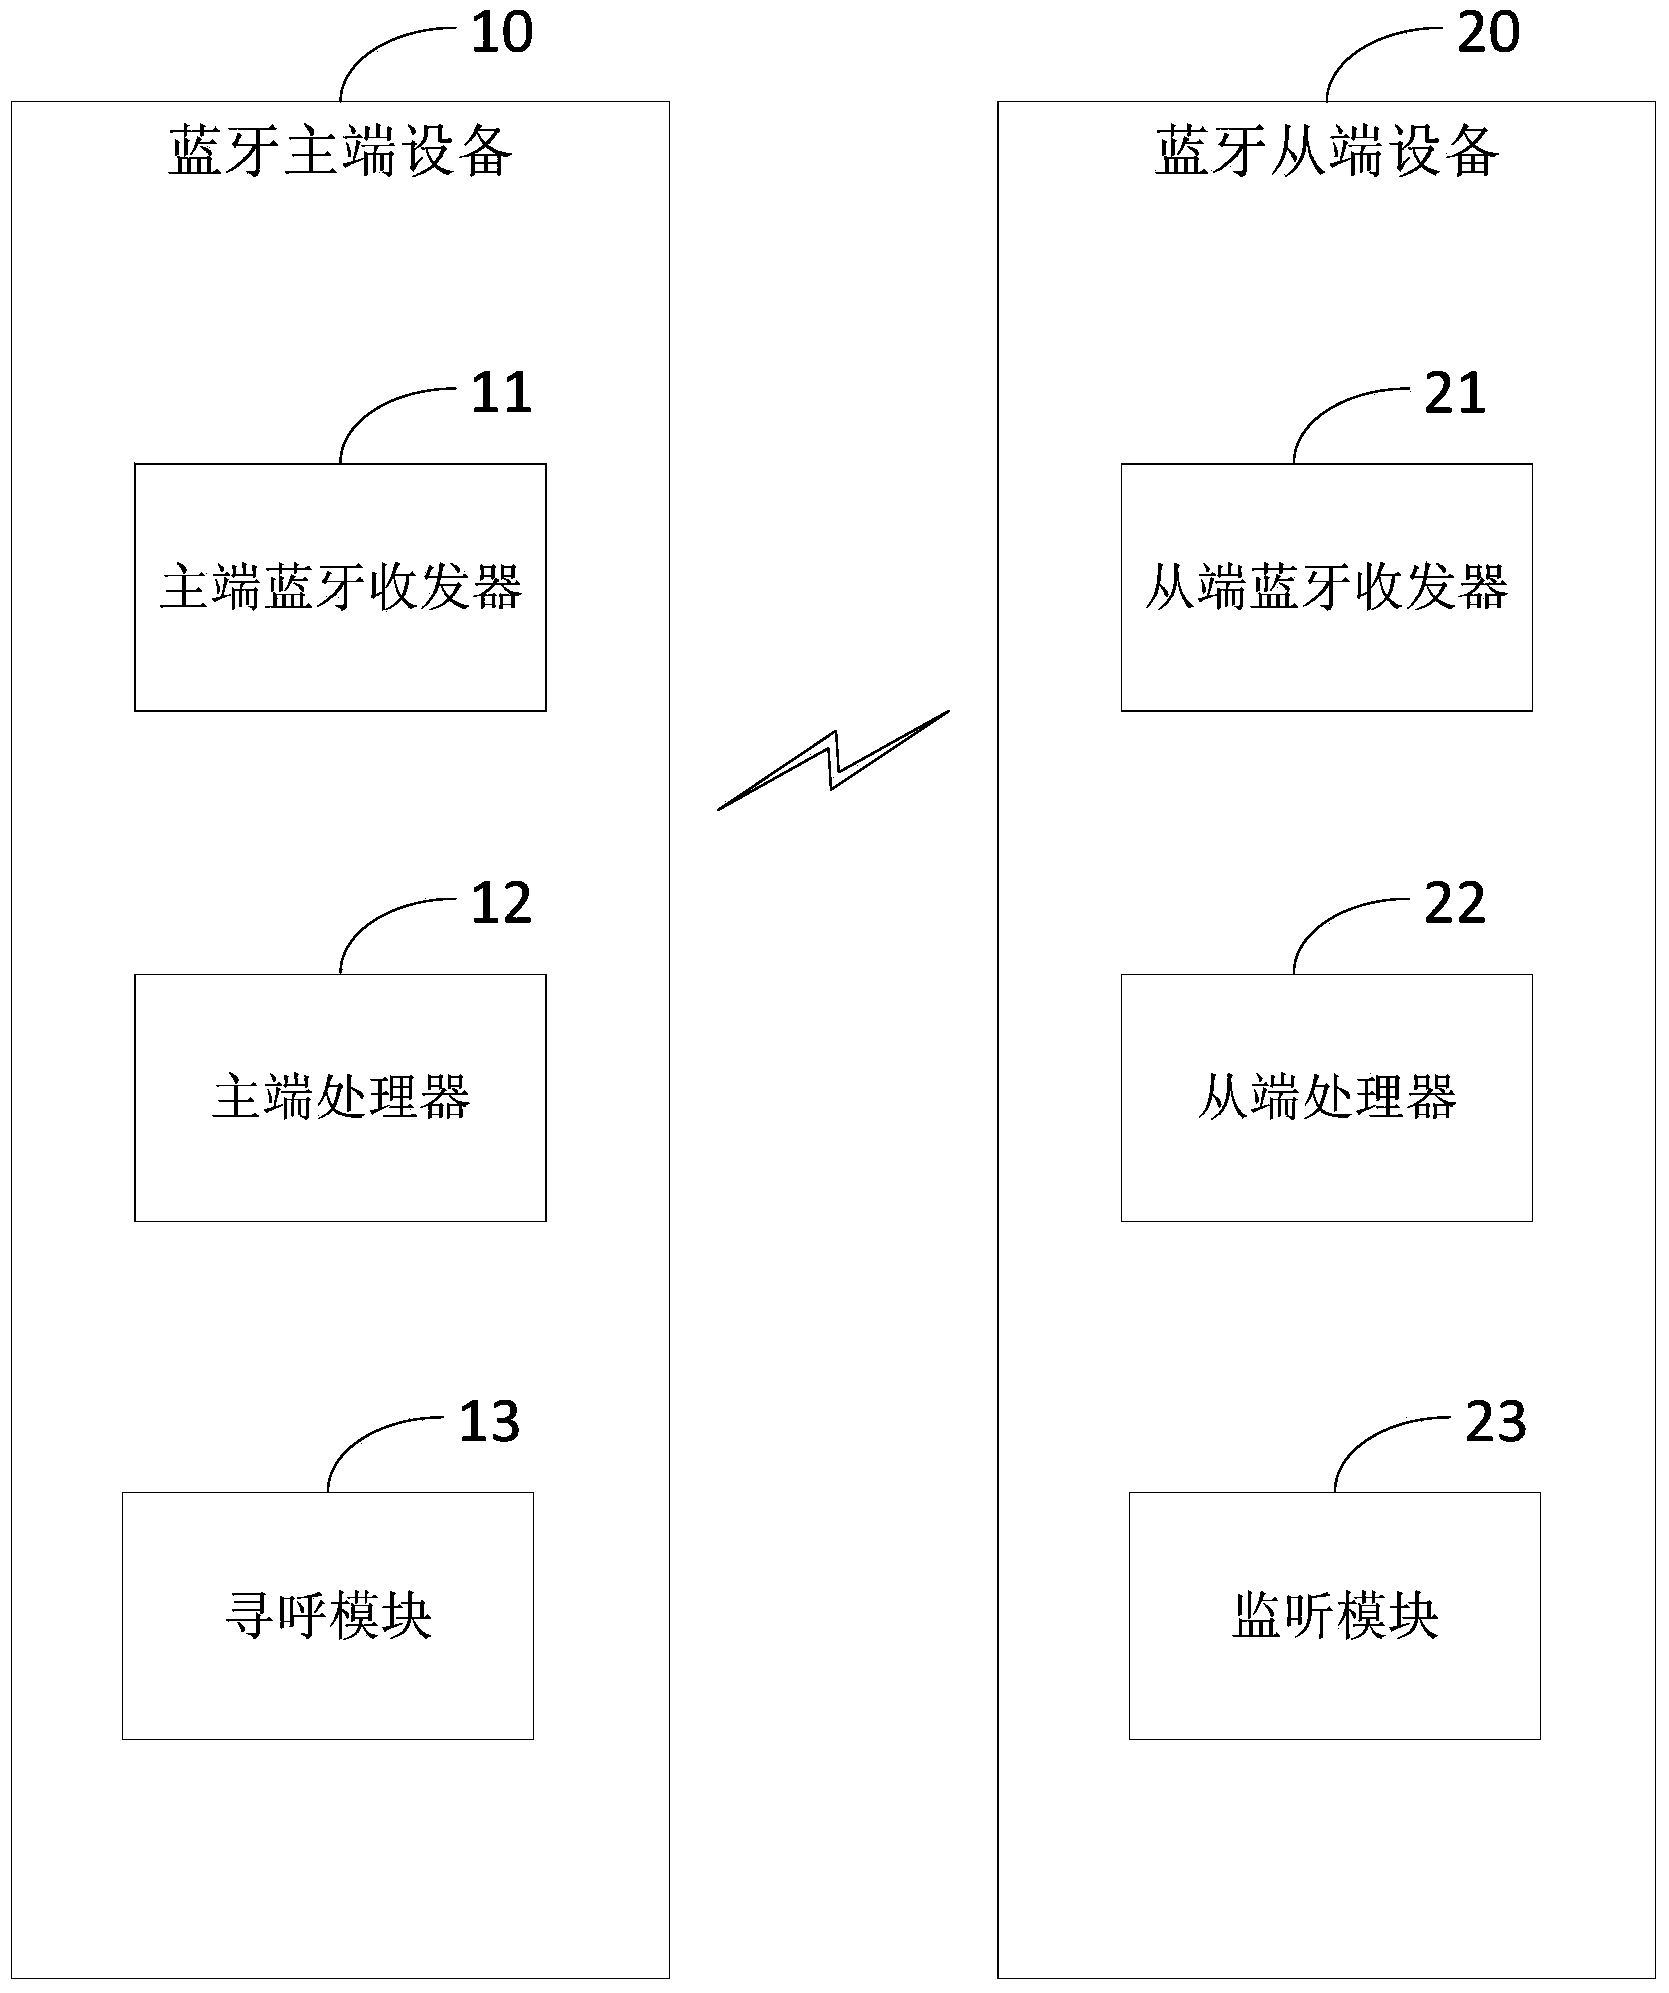 Method and device of connecting Bluetooth devices at master end and slave ends